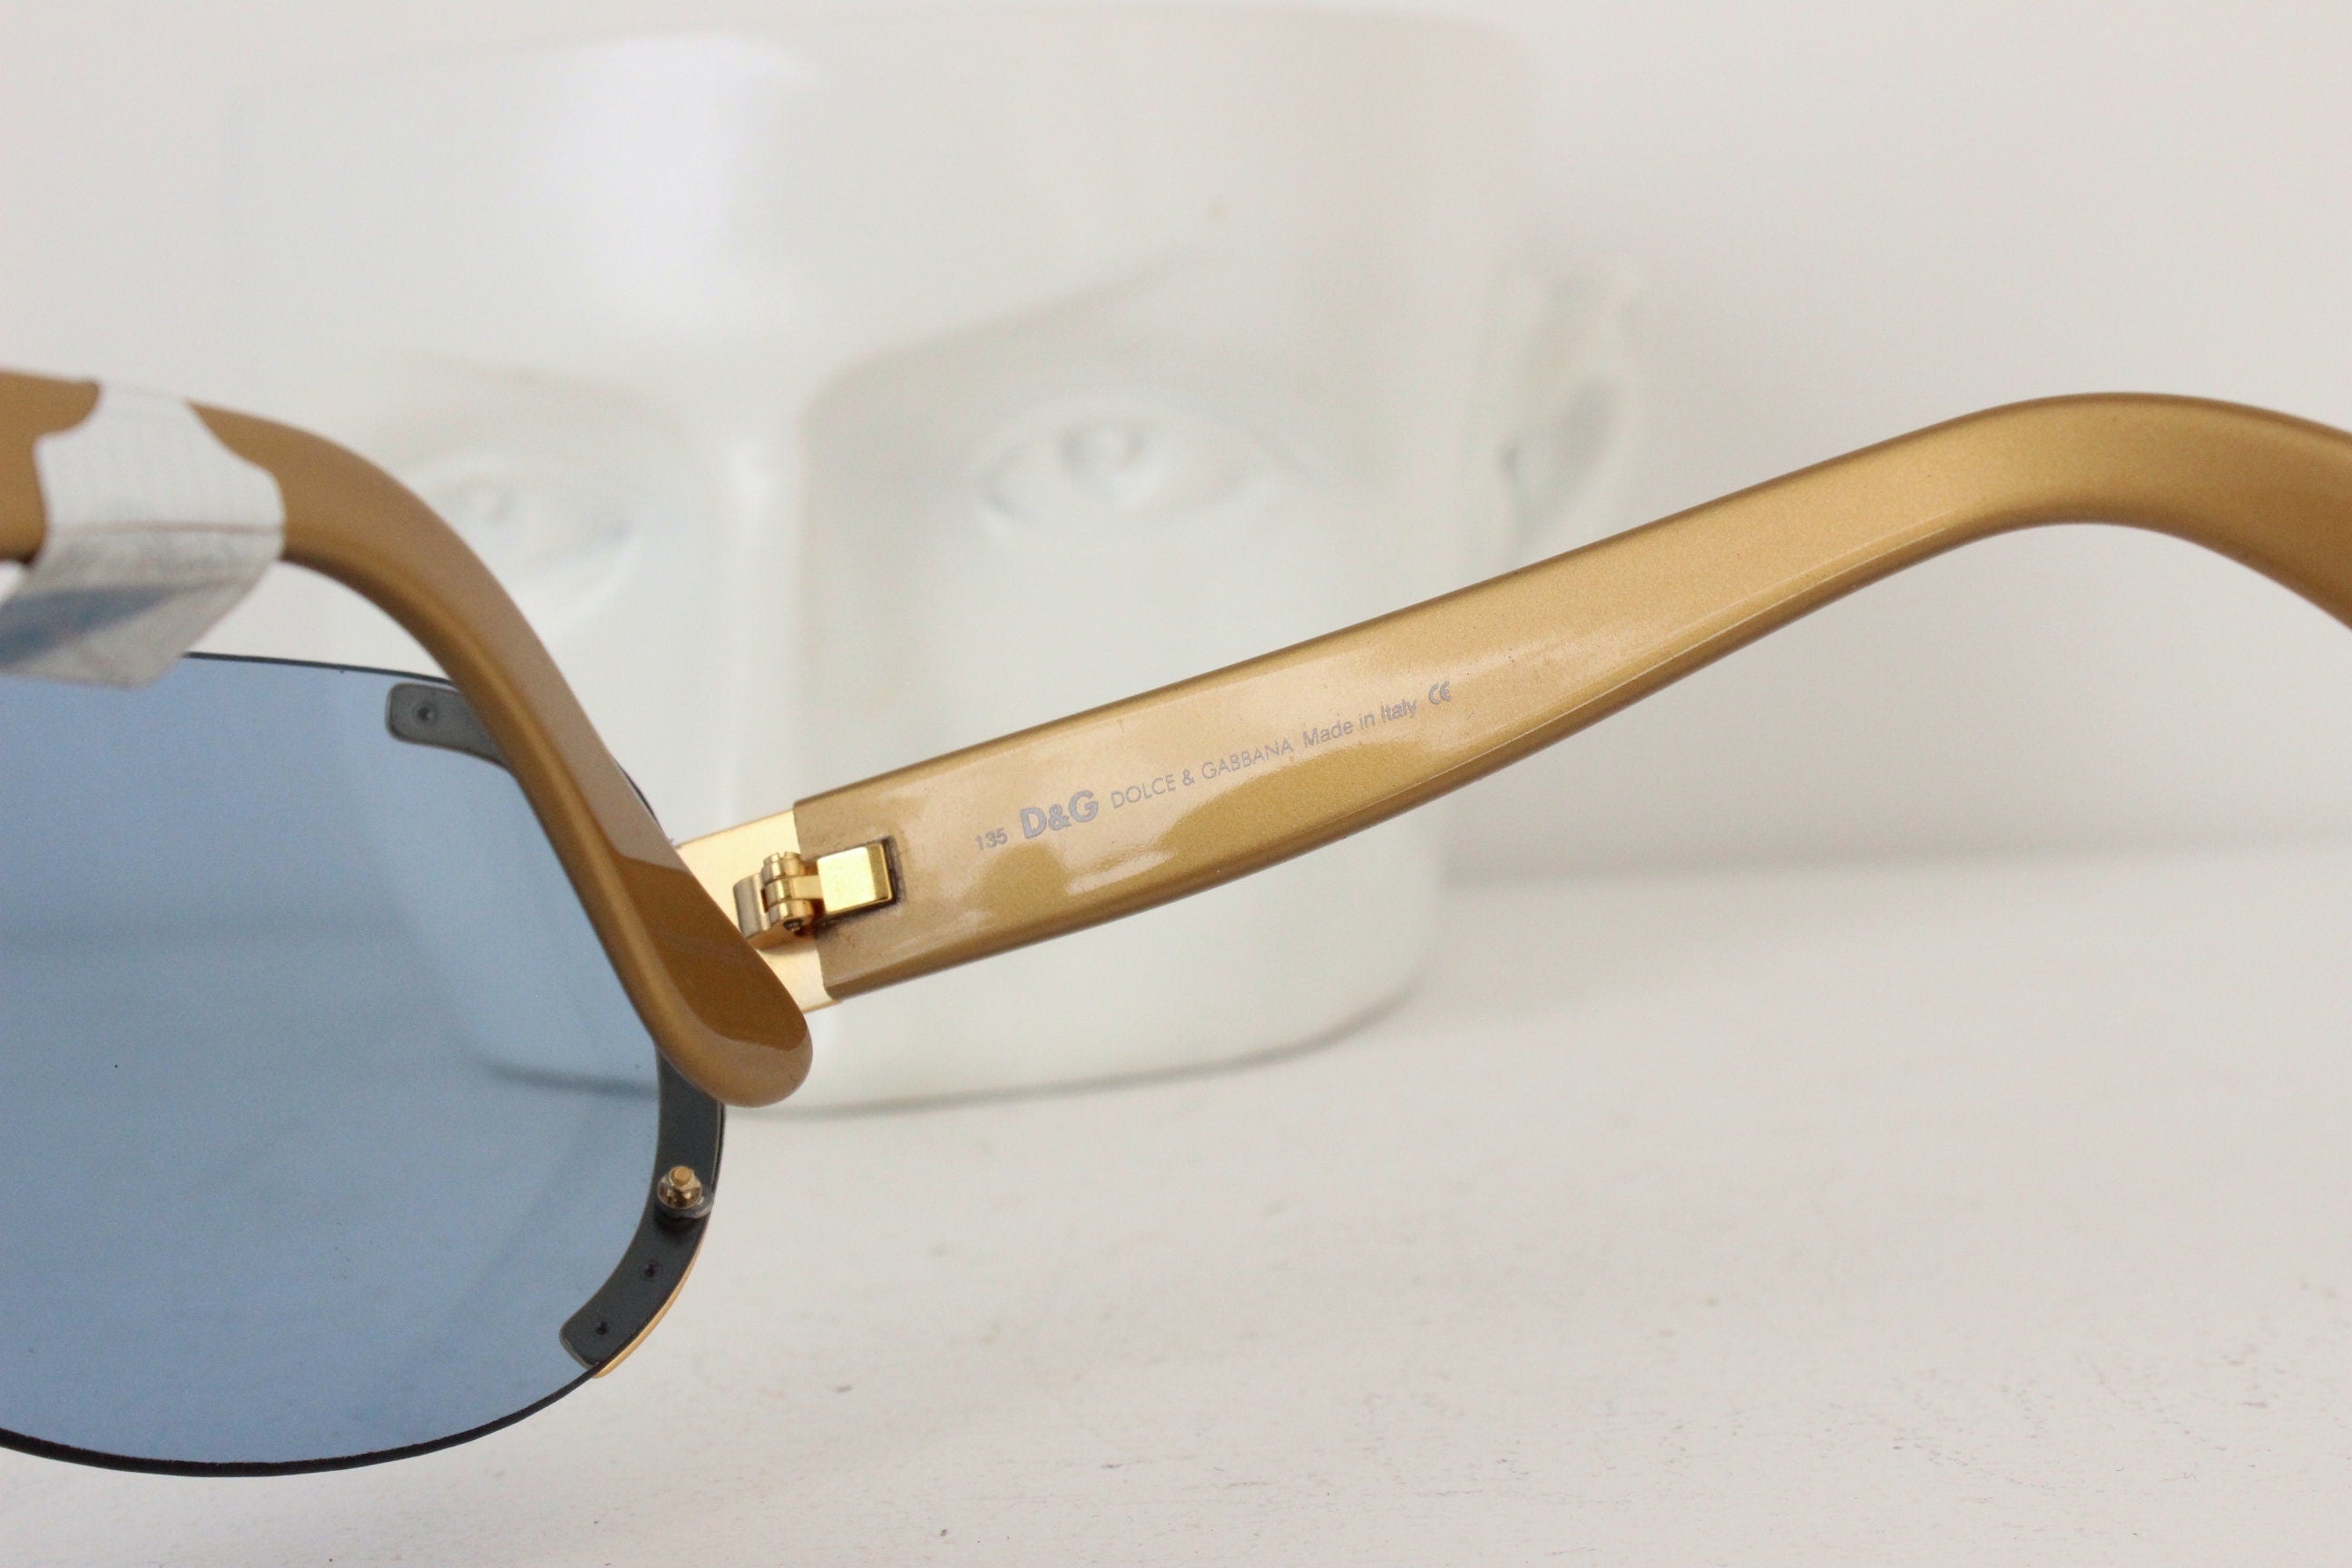 Early 90s Dolce and Gabbana [D&G] Blue Lens Oversized Shield Sunglasses